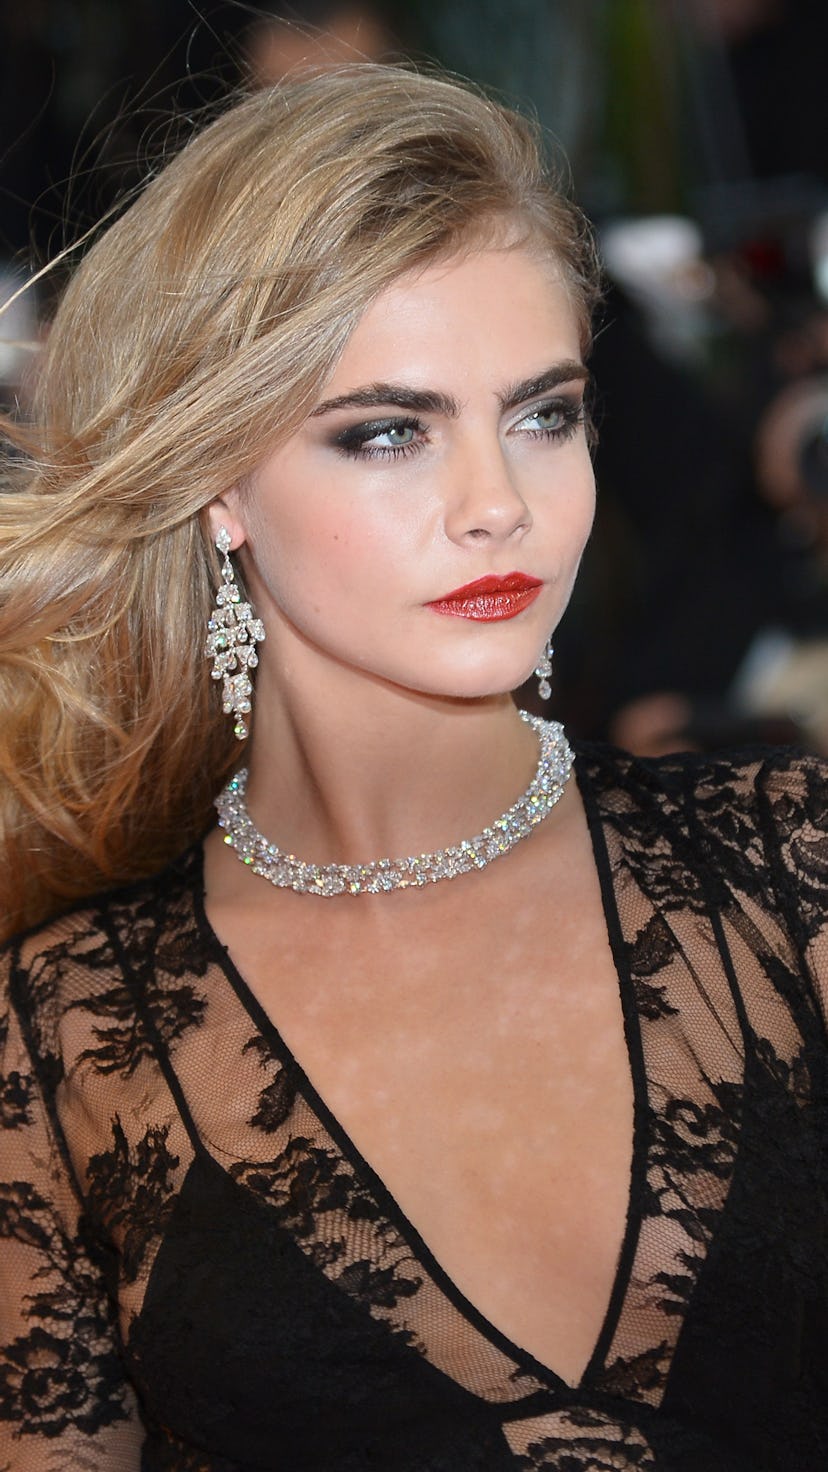 Cara Delevingne at the 2013 Cannes Film Festival.